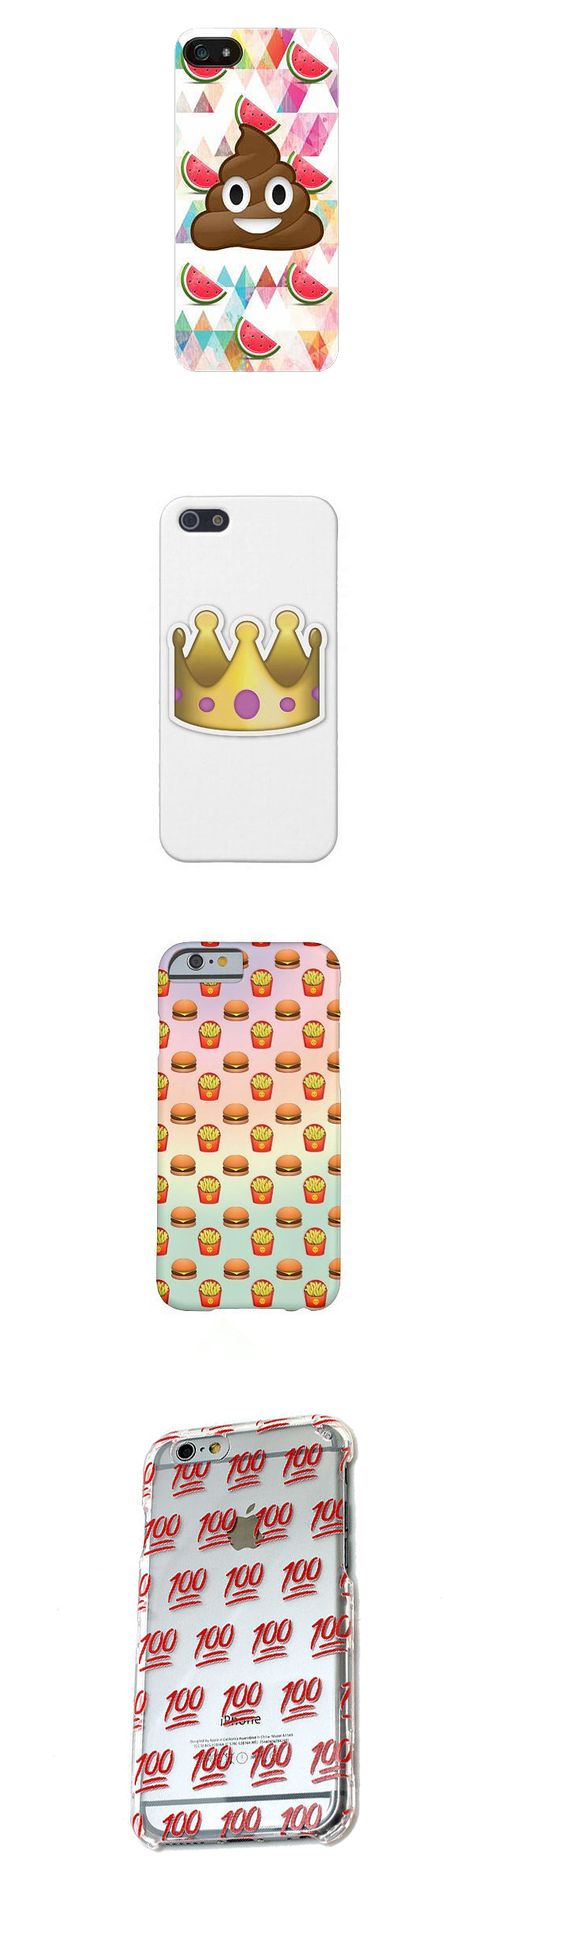 Show off your favorite emojis with one of these iPhone cases.